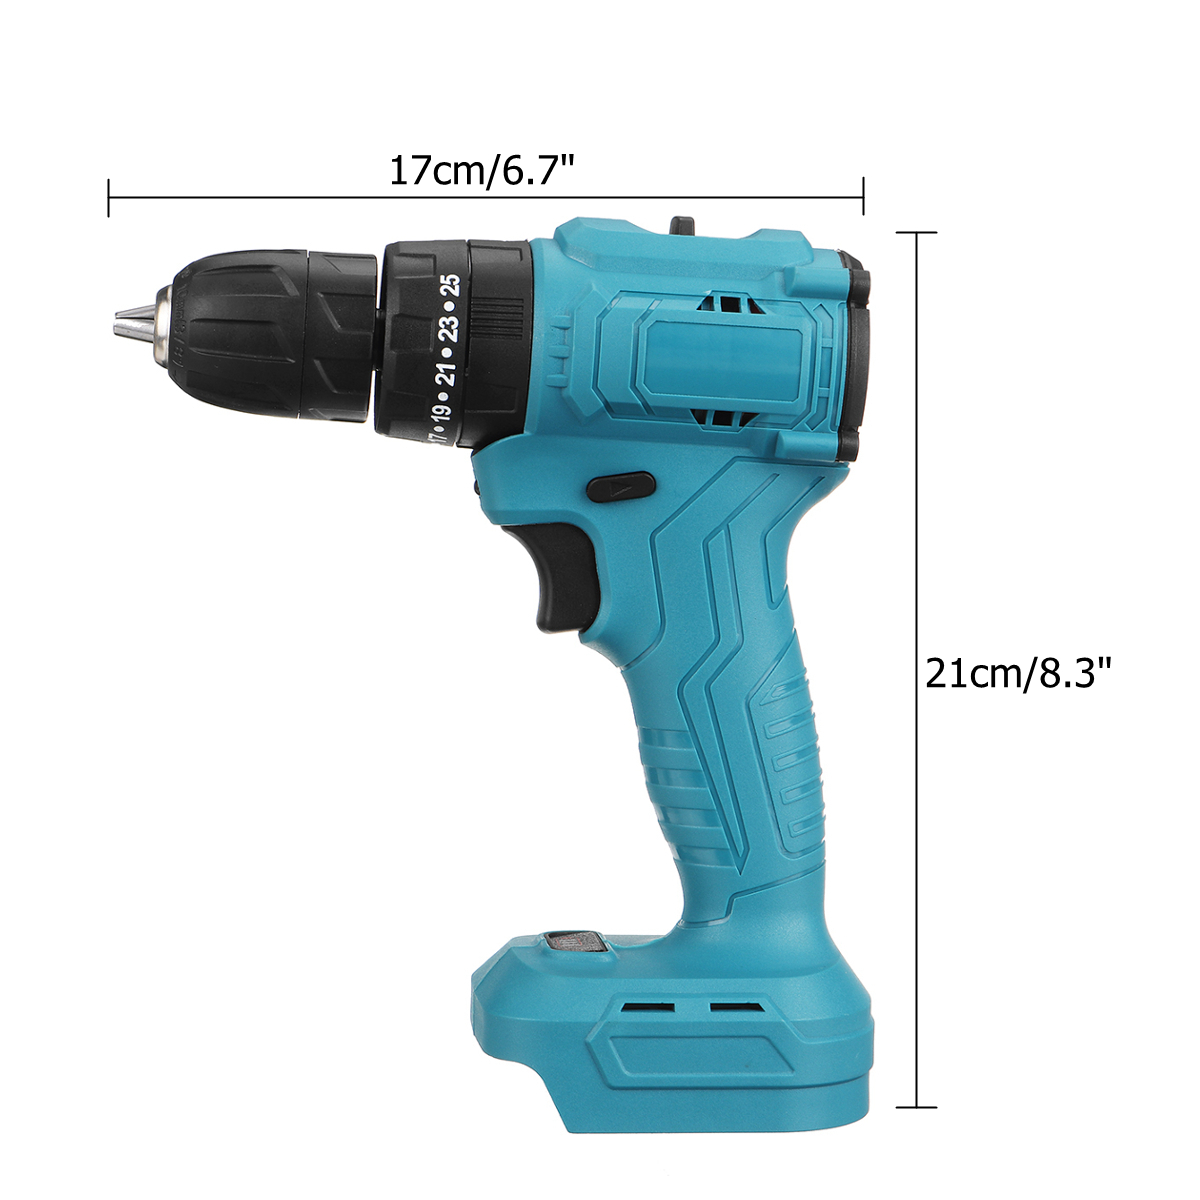 520Nm-Brushless-Cordless-38-Electric-Impact-Drill-Driver-Replacement-for-Makita-18V-Battery-1733295-13